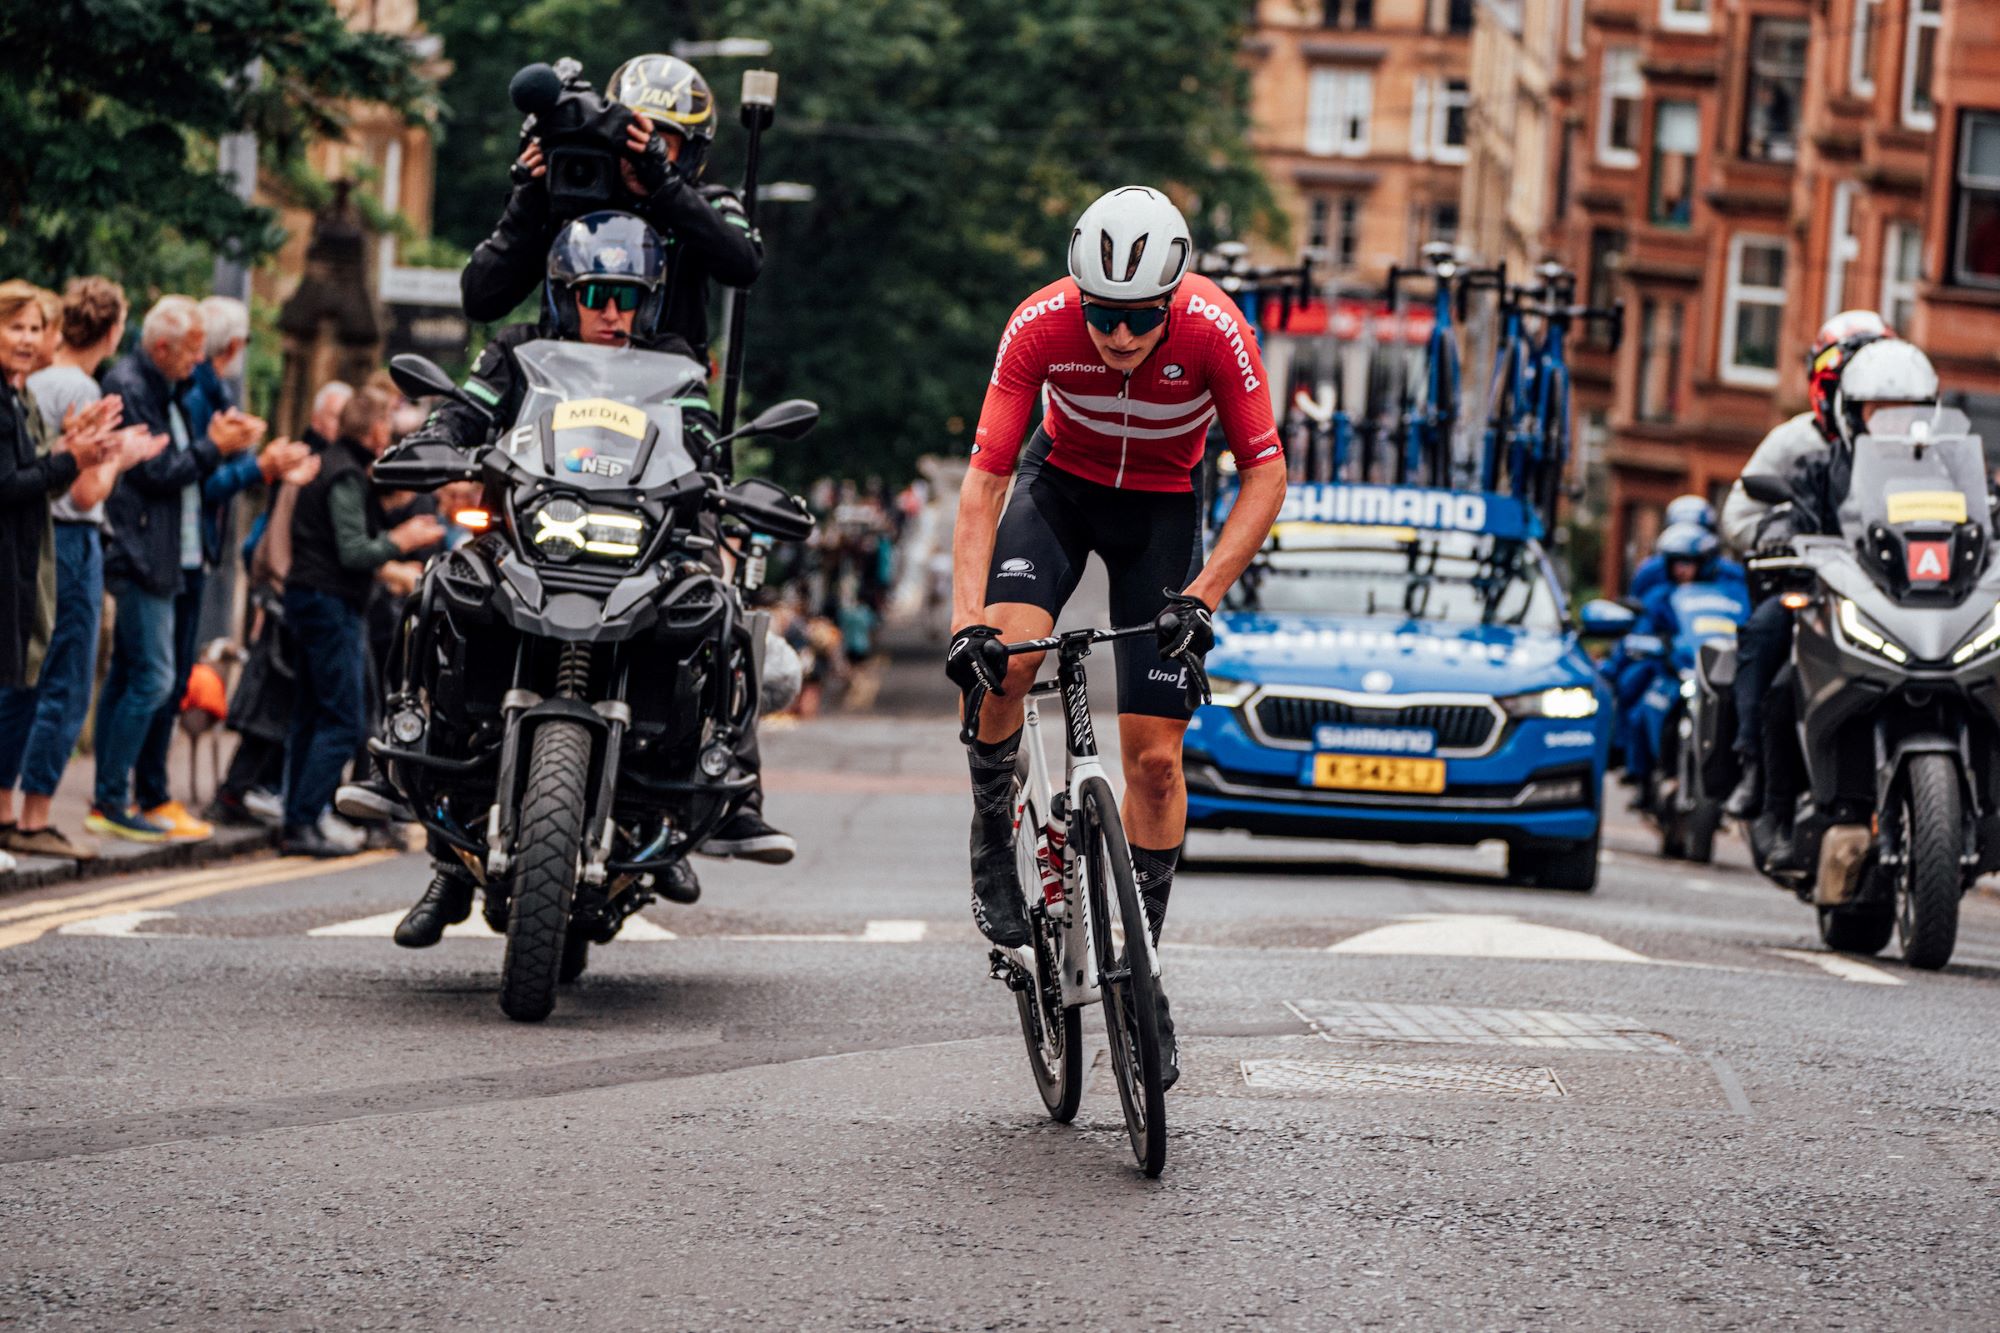 How to watch Road Cycling World Championships Live…